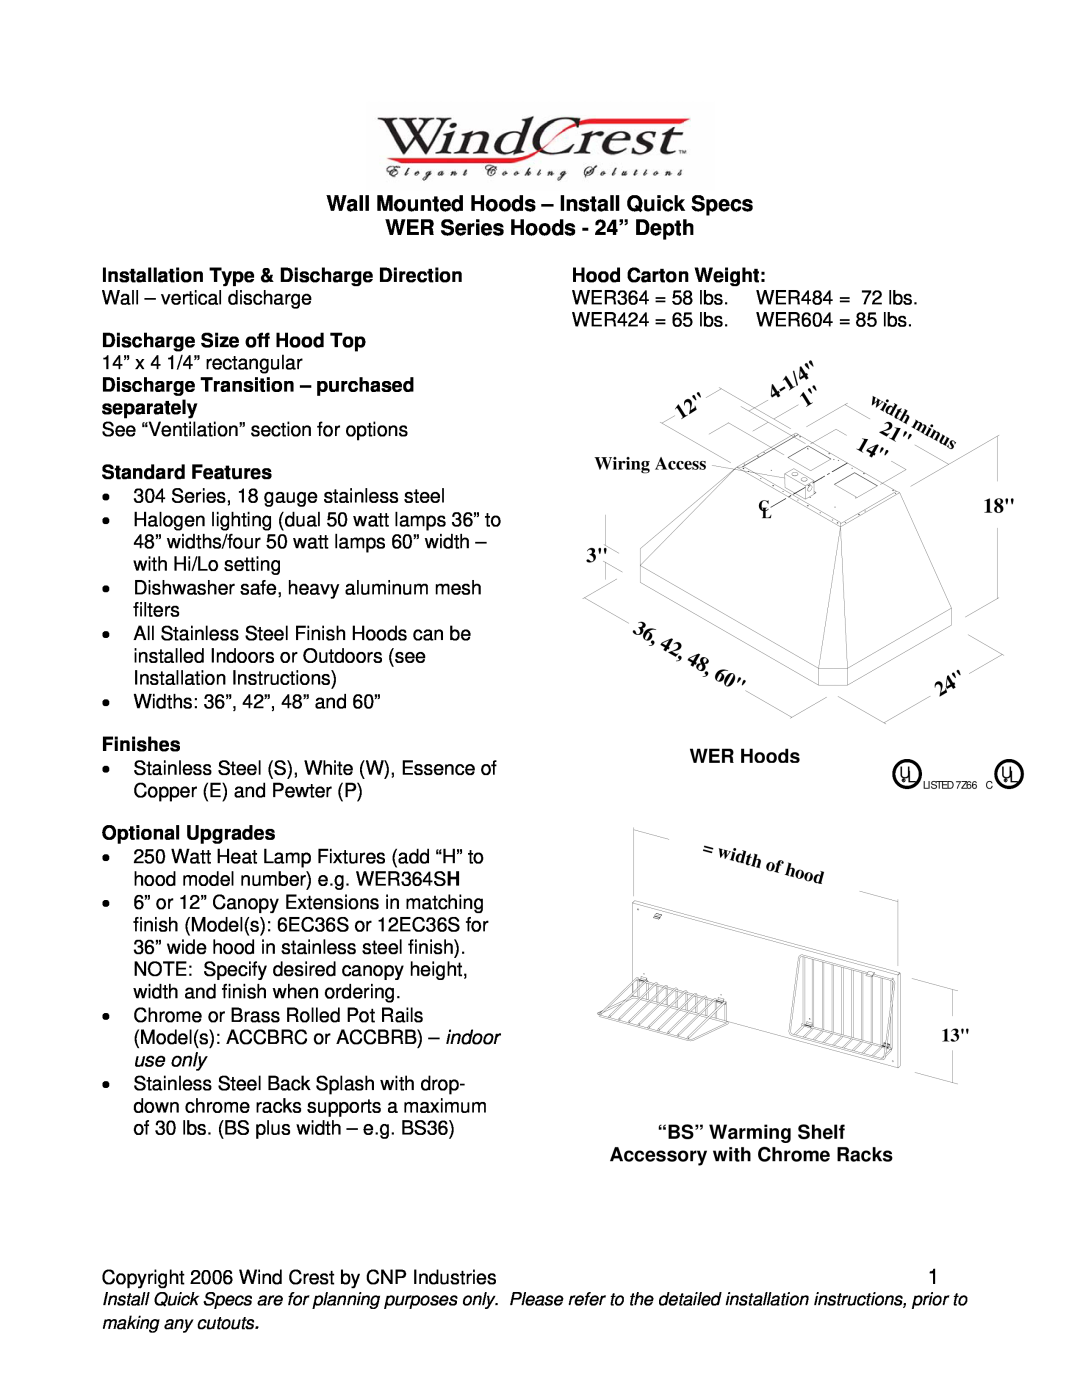 Wind Crest WER364SH installation instructions = width of hood, use only 